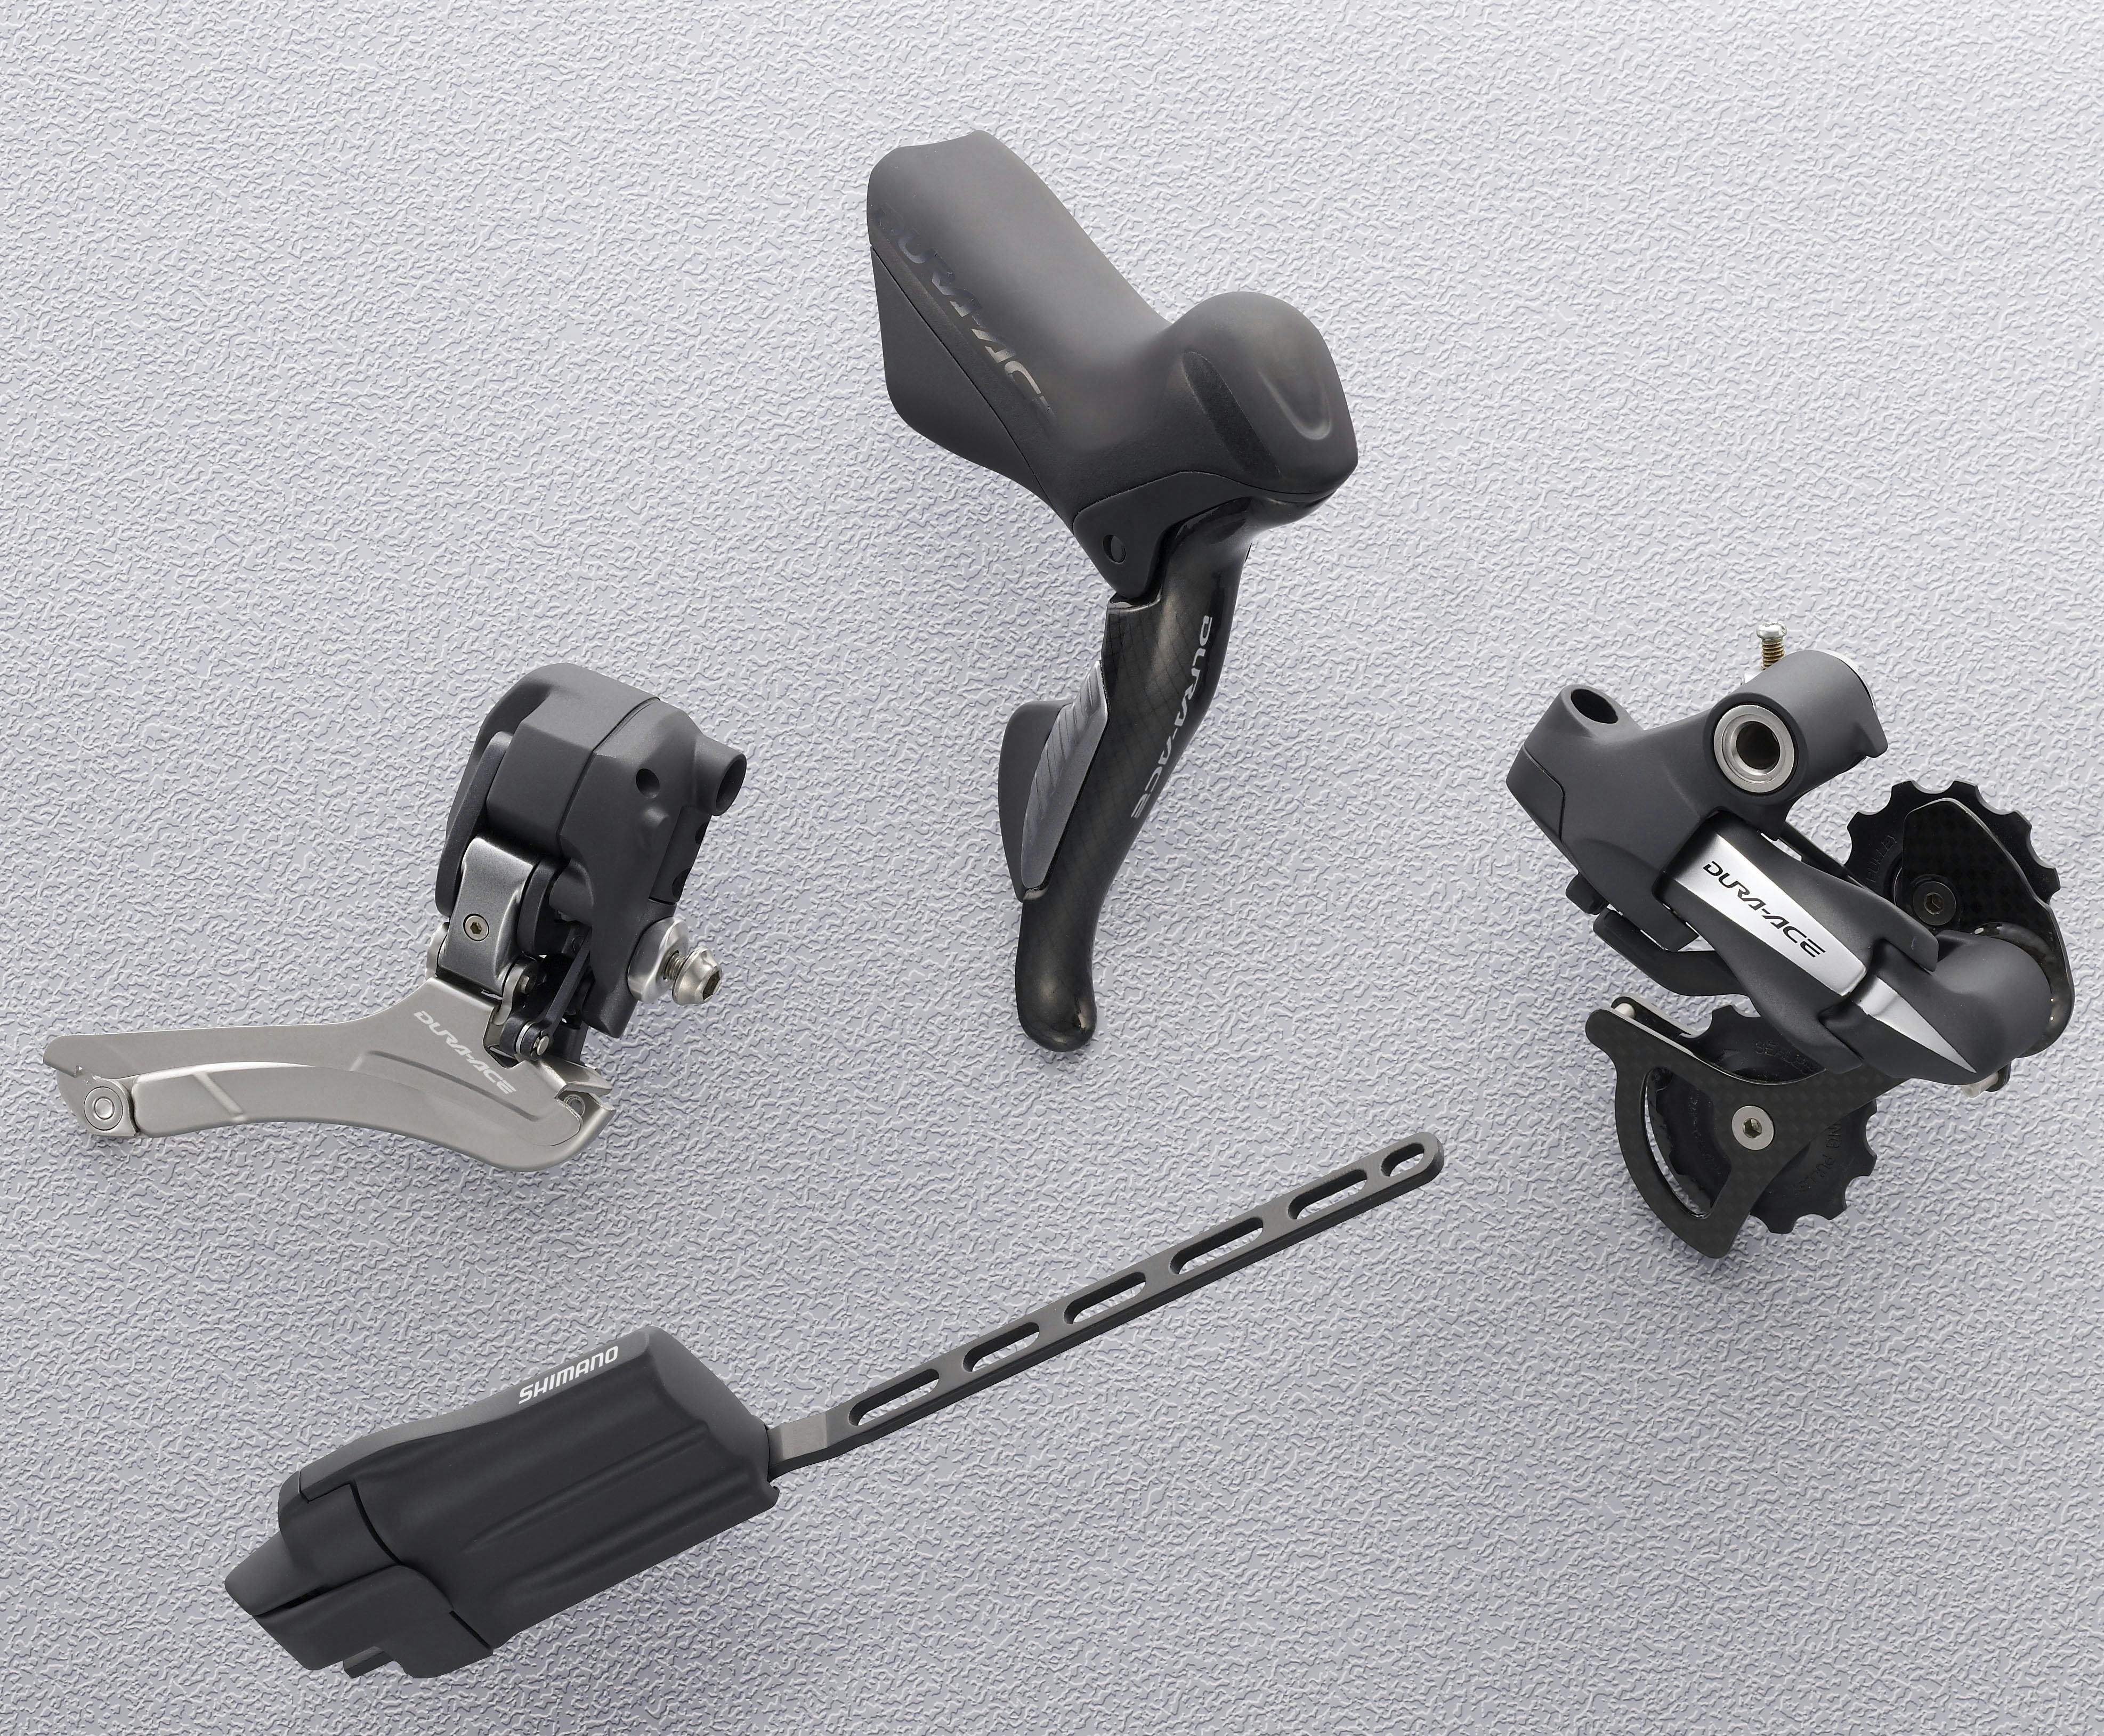 Shimano Introduces Electronic Shifting With Di2 Dura-Ace